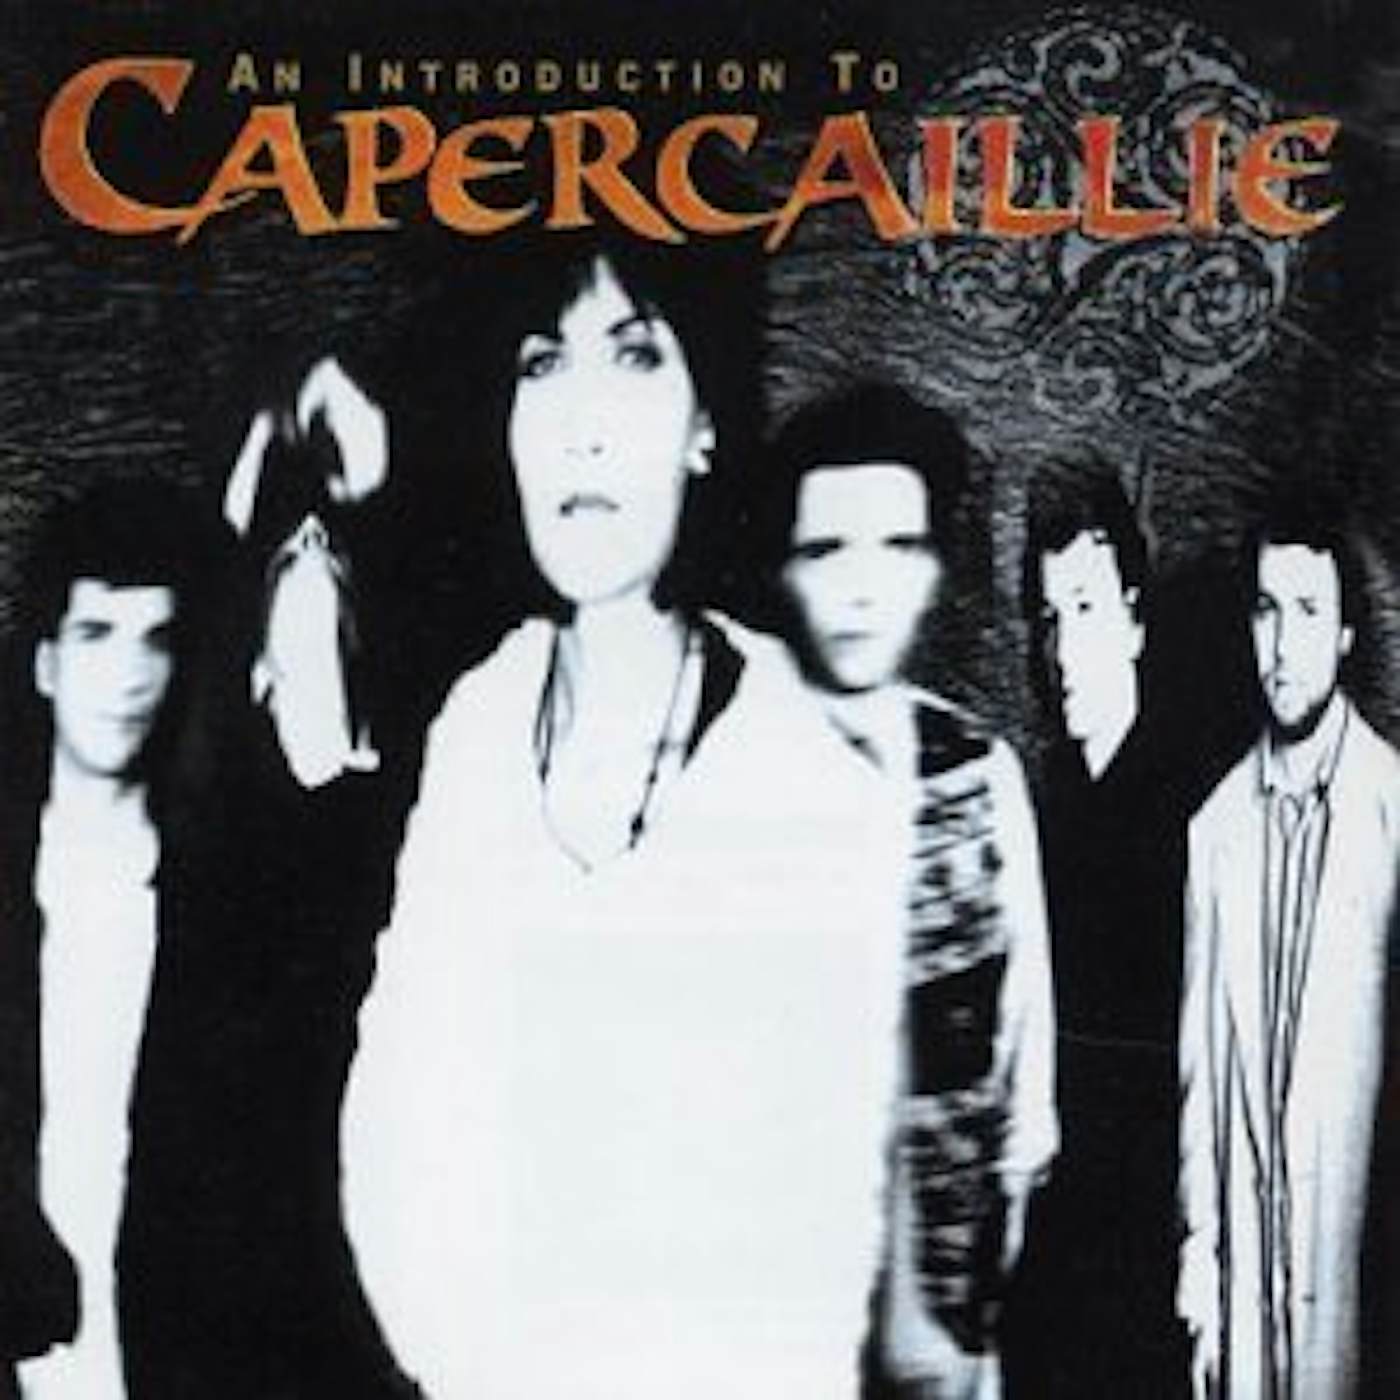 INTRODUCTION TO CAPERCAILLIE CD